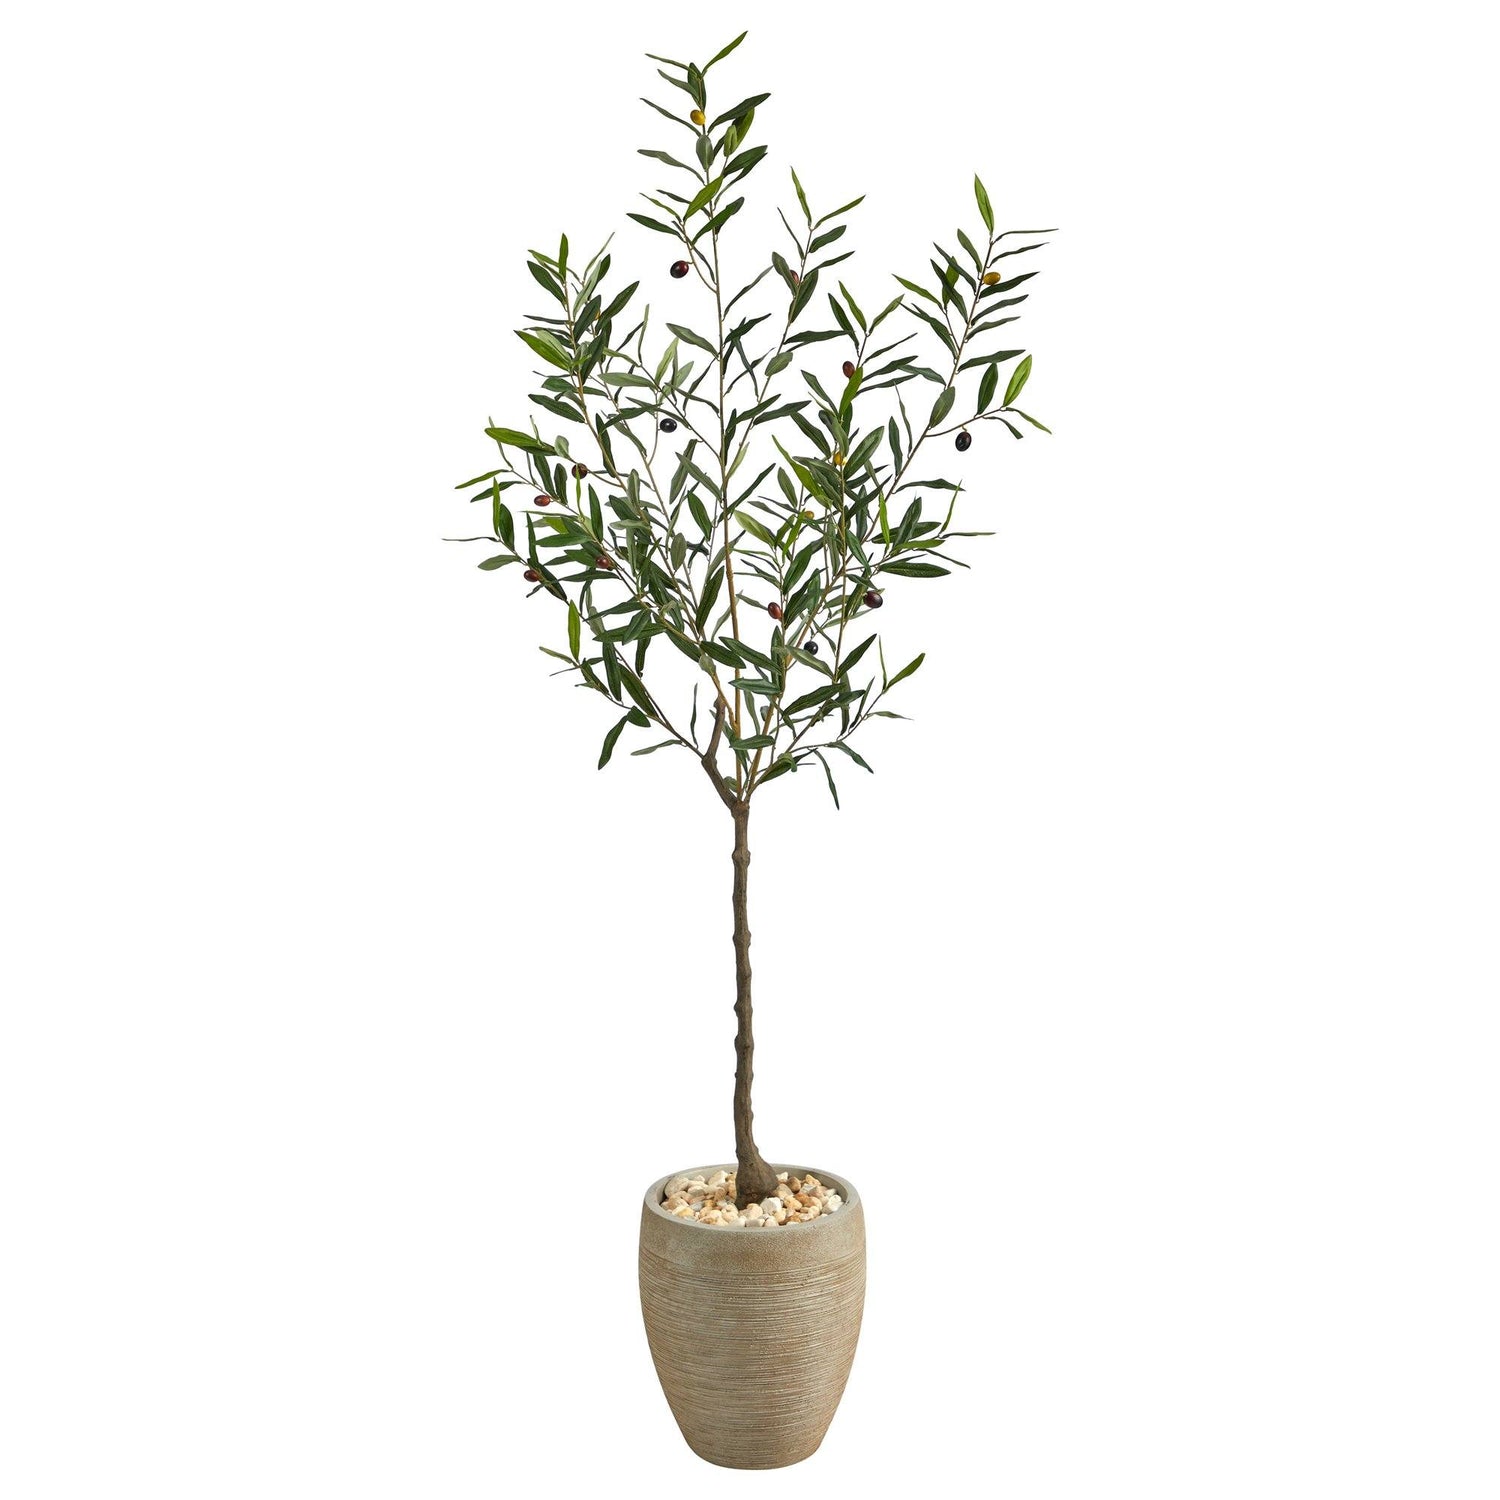 5.5’ Olive Artificial Tree in Sand Colored Planter